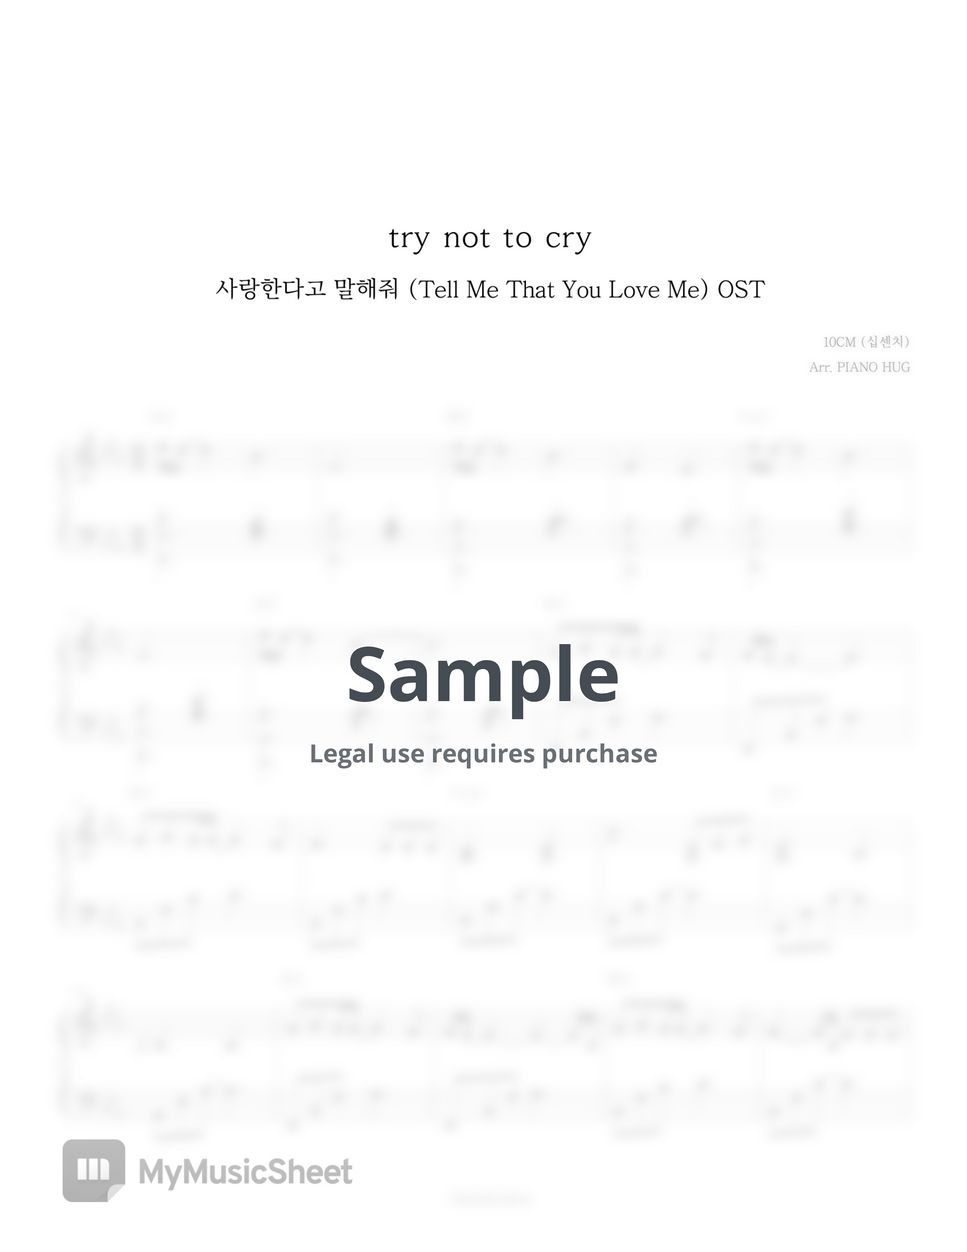 10cm - try not to cry (Tell me that you love me OST) by Piano Hug